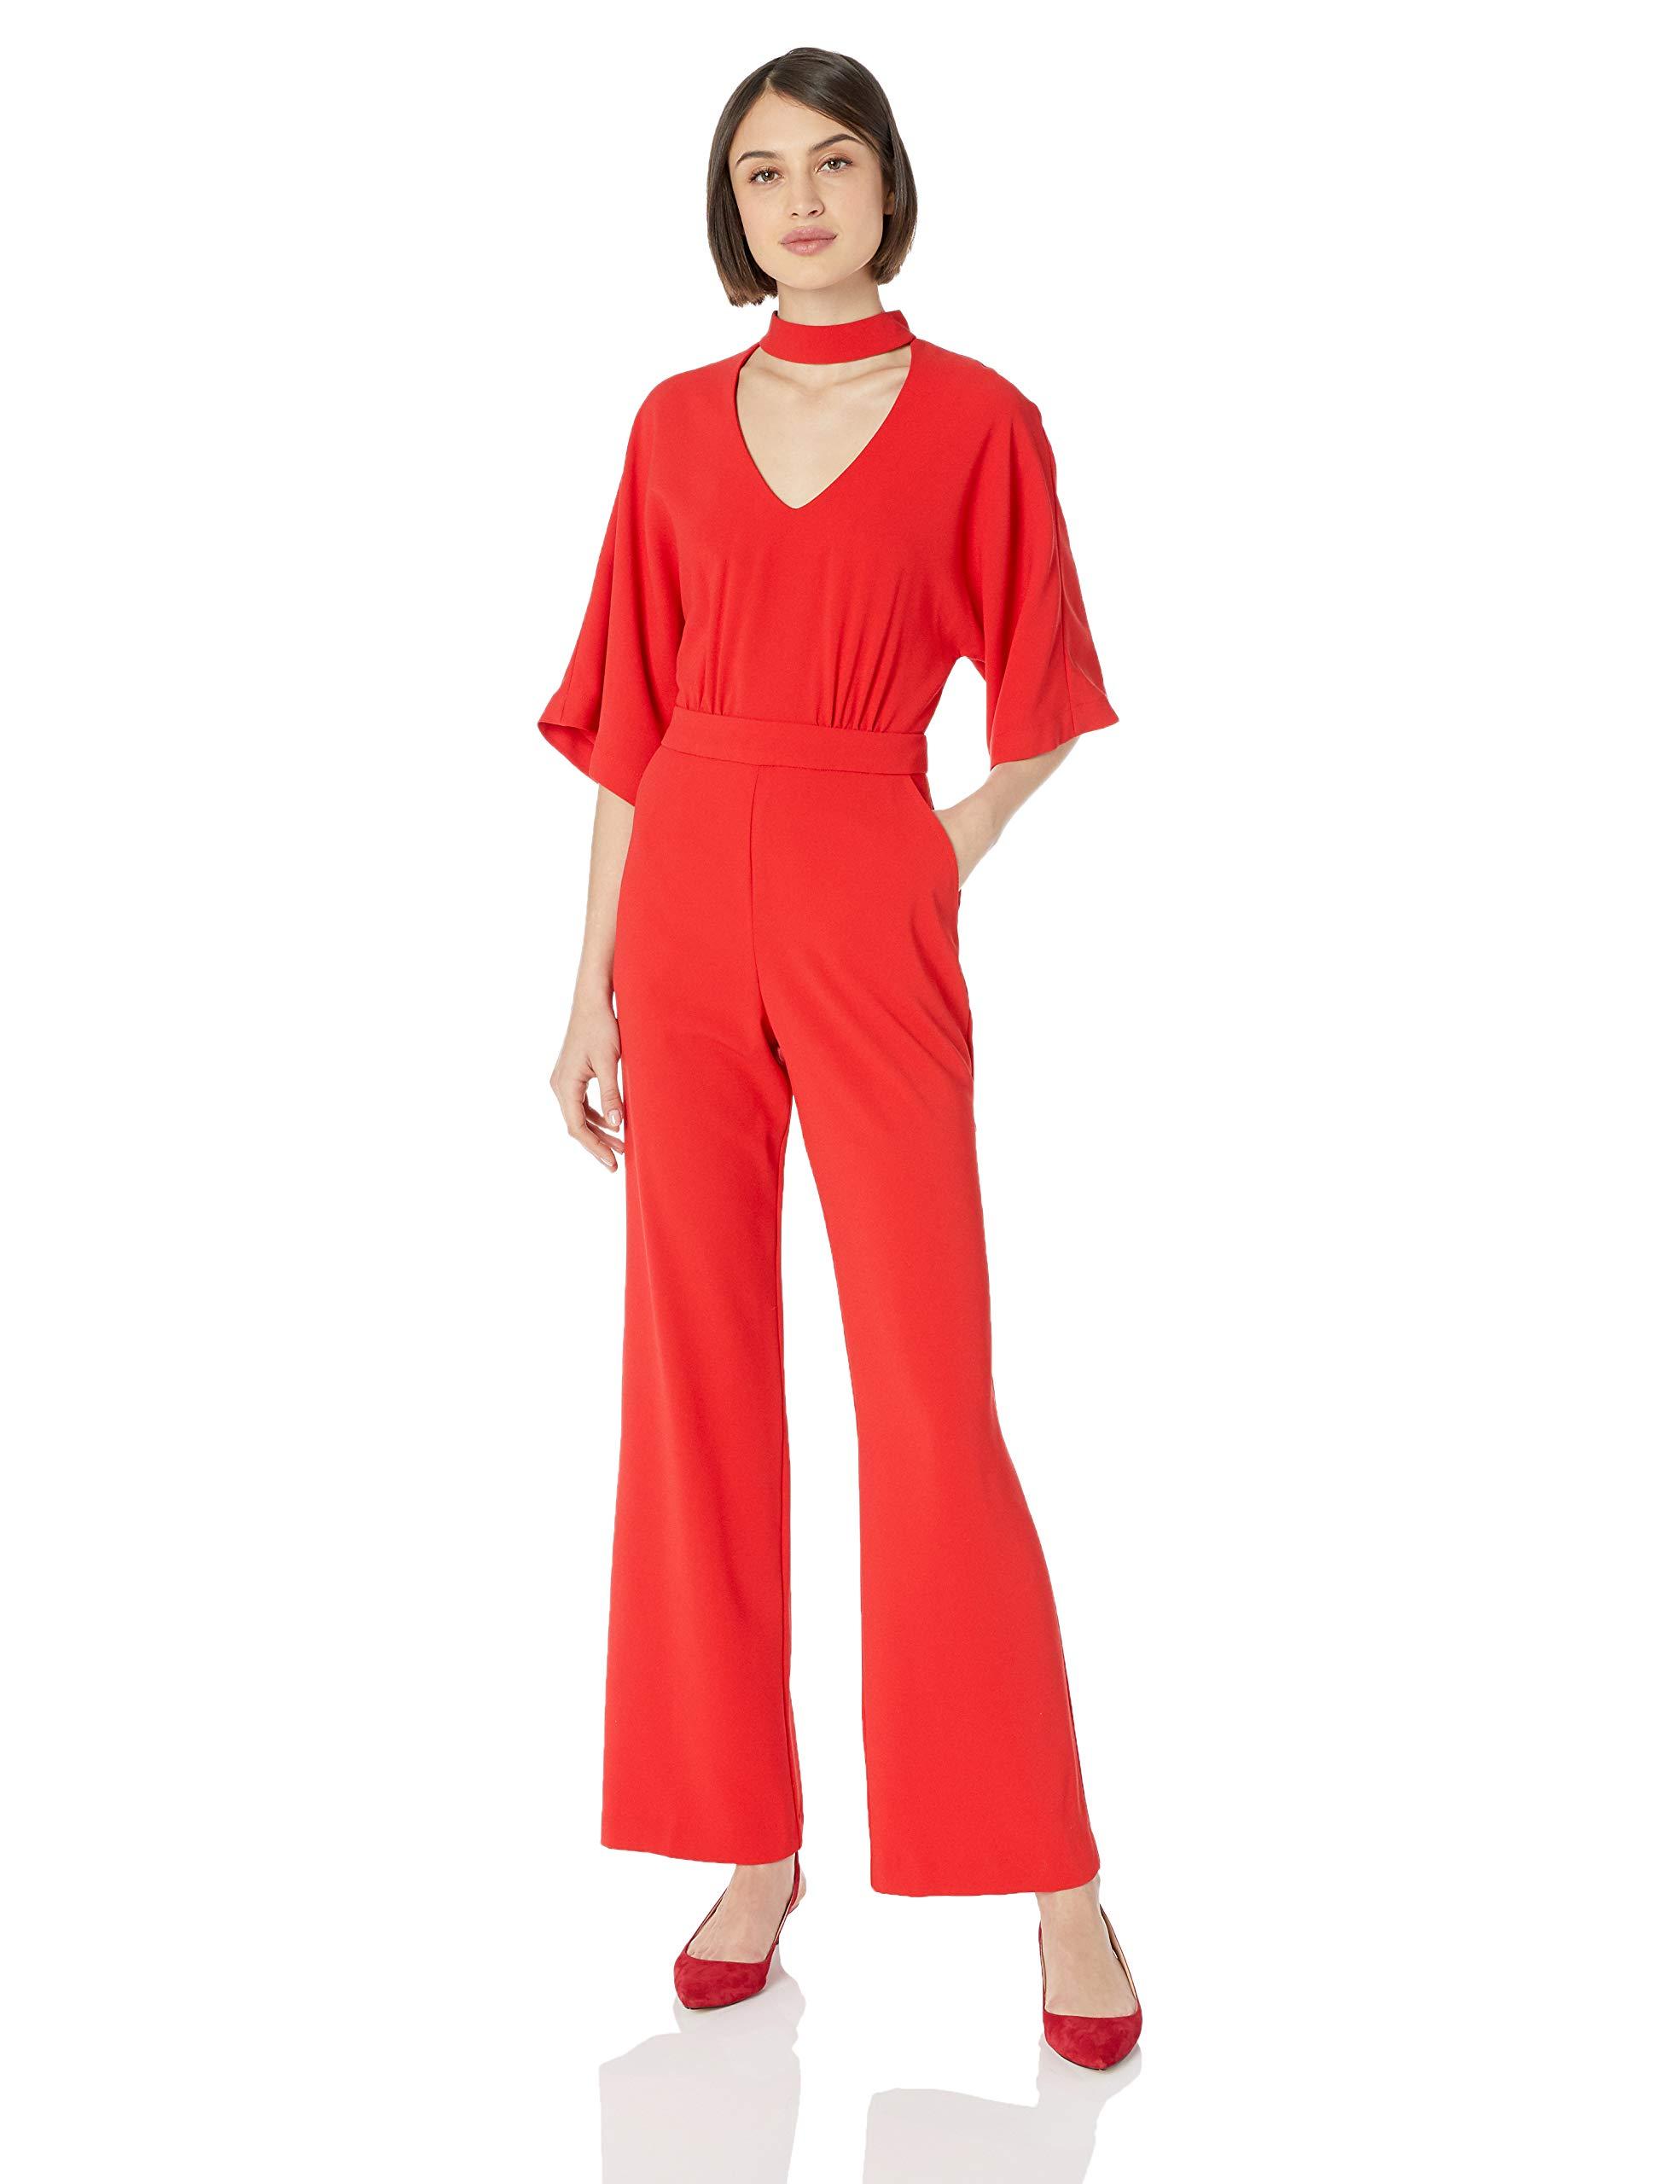 Trina Turk Ambient Choker Neck Jumpsuit in Red - Save 10% - Lyst